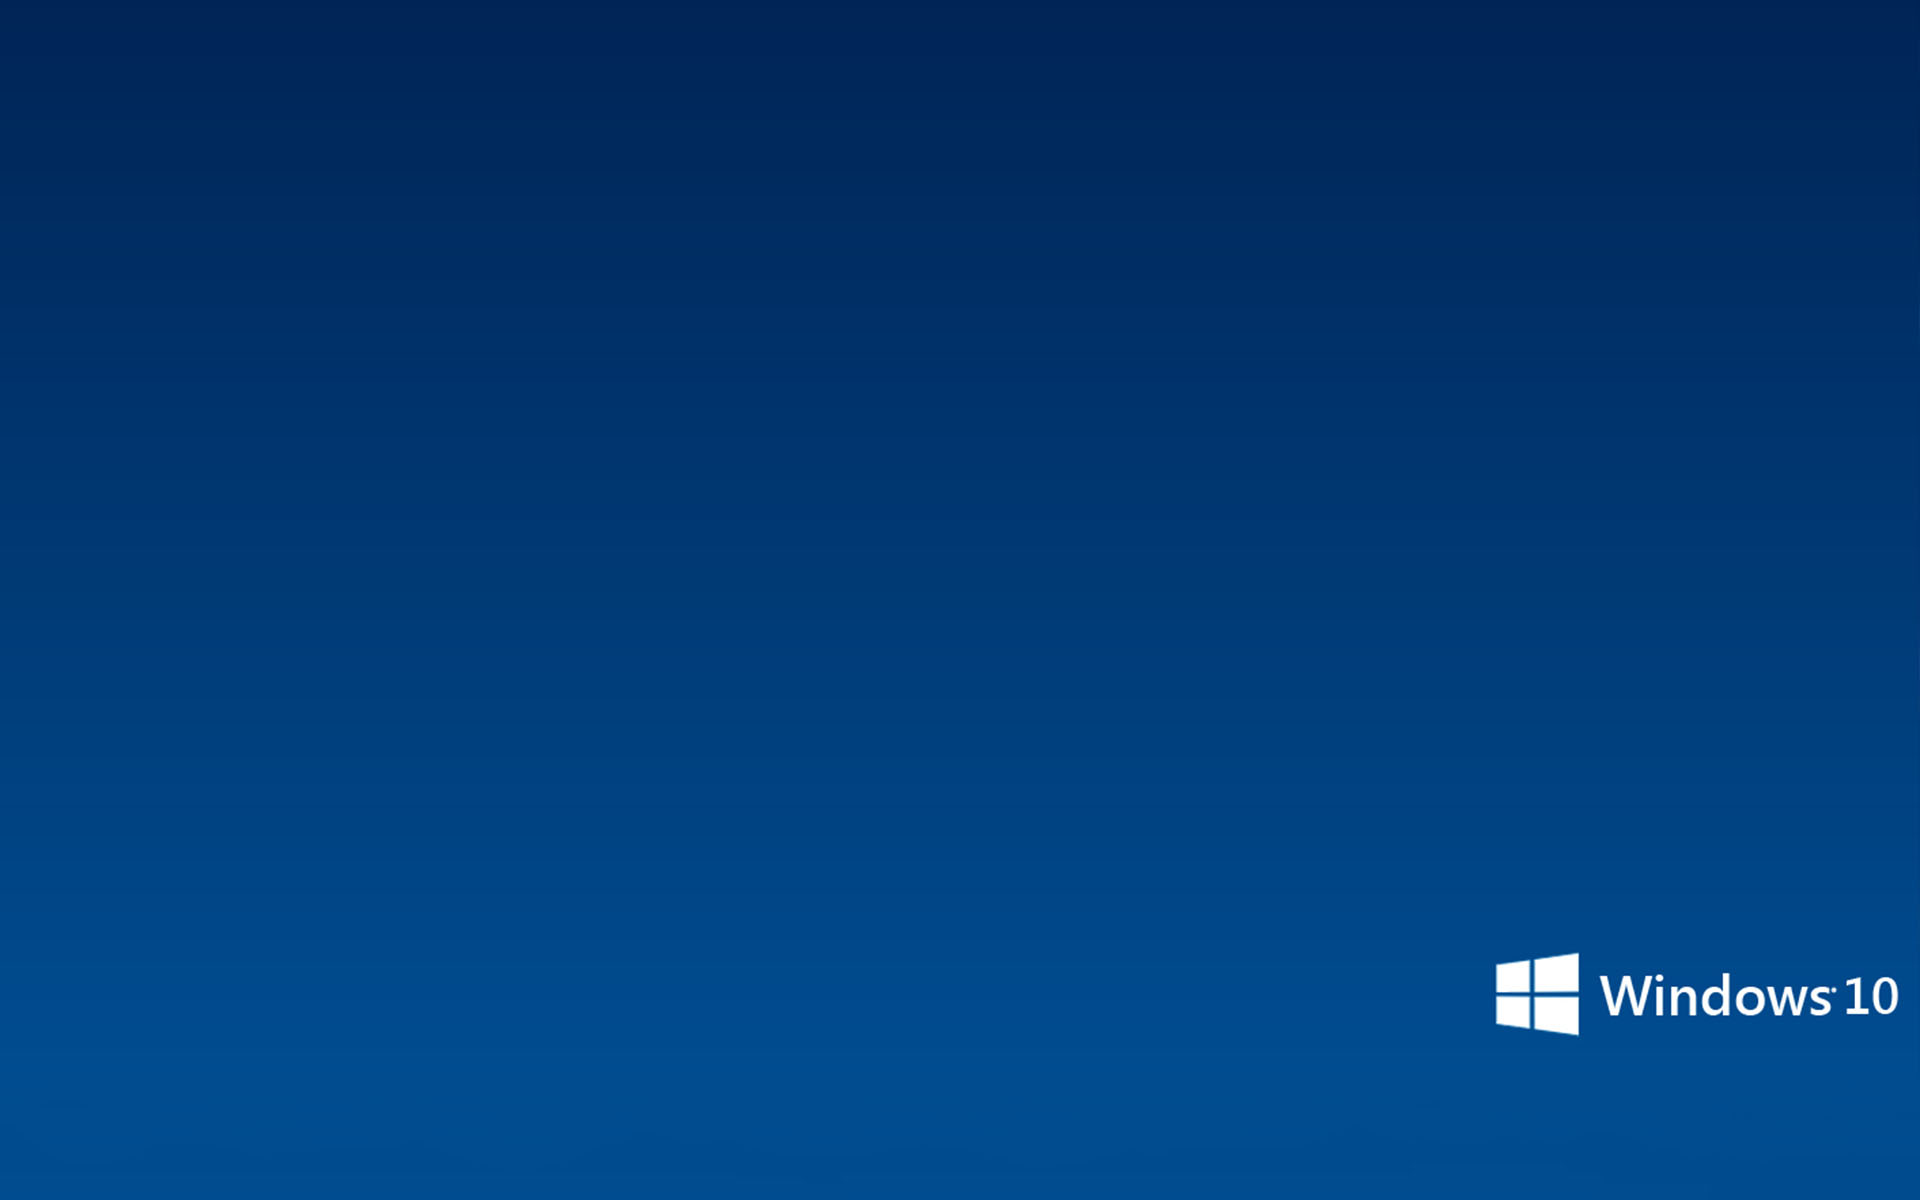 Free Download Simple Microsoft Windows 10 Wallpaper Wallpapers 19x10 For Your Desktop Mobile Tablet Explore 46 Different Wallpaper Windows 10 Desktops Windows 10 Virtual Desktop Wallpaper Windows 10 Two Different Wallpapers